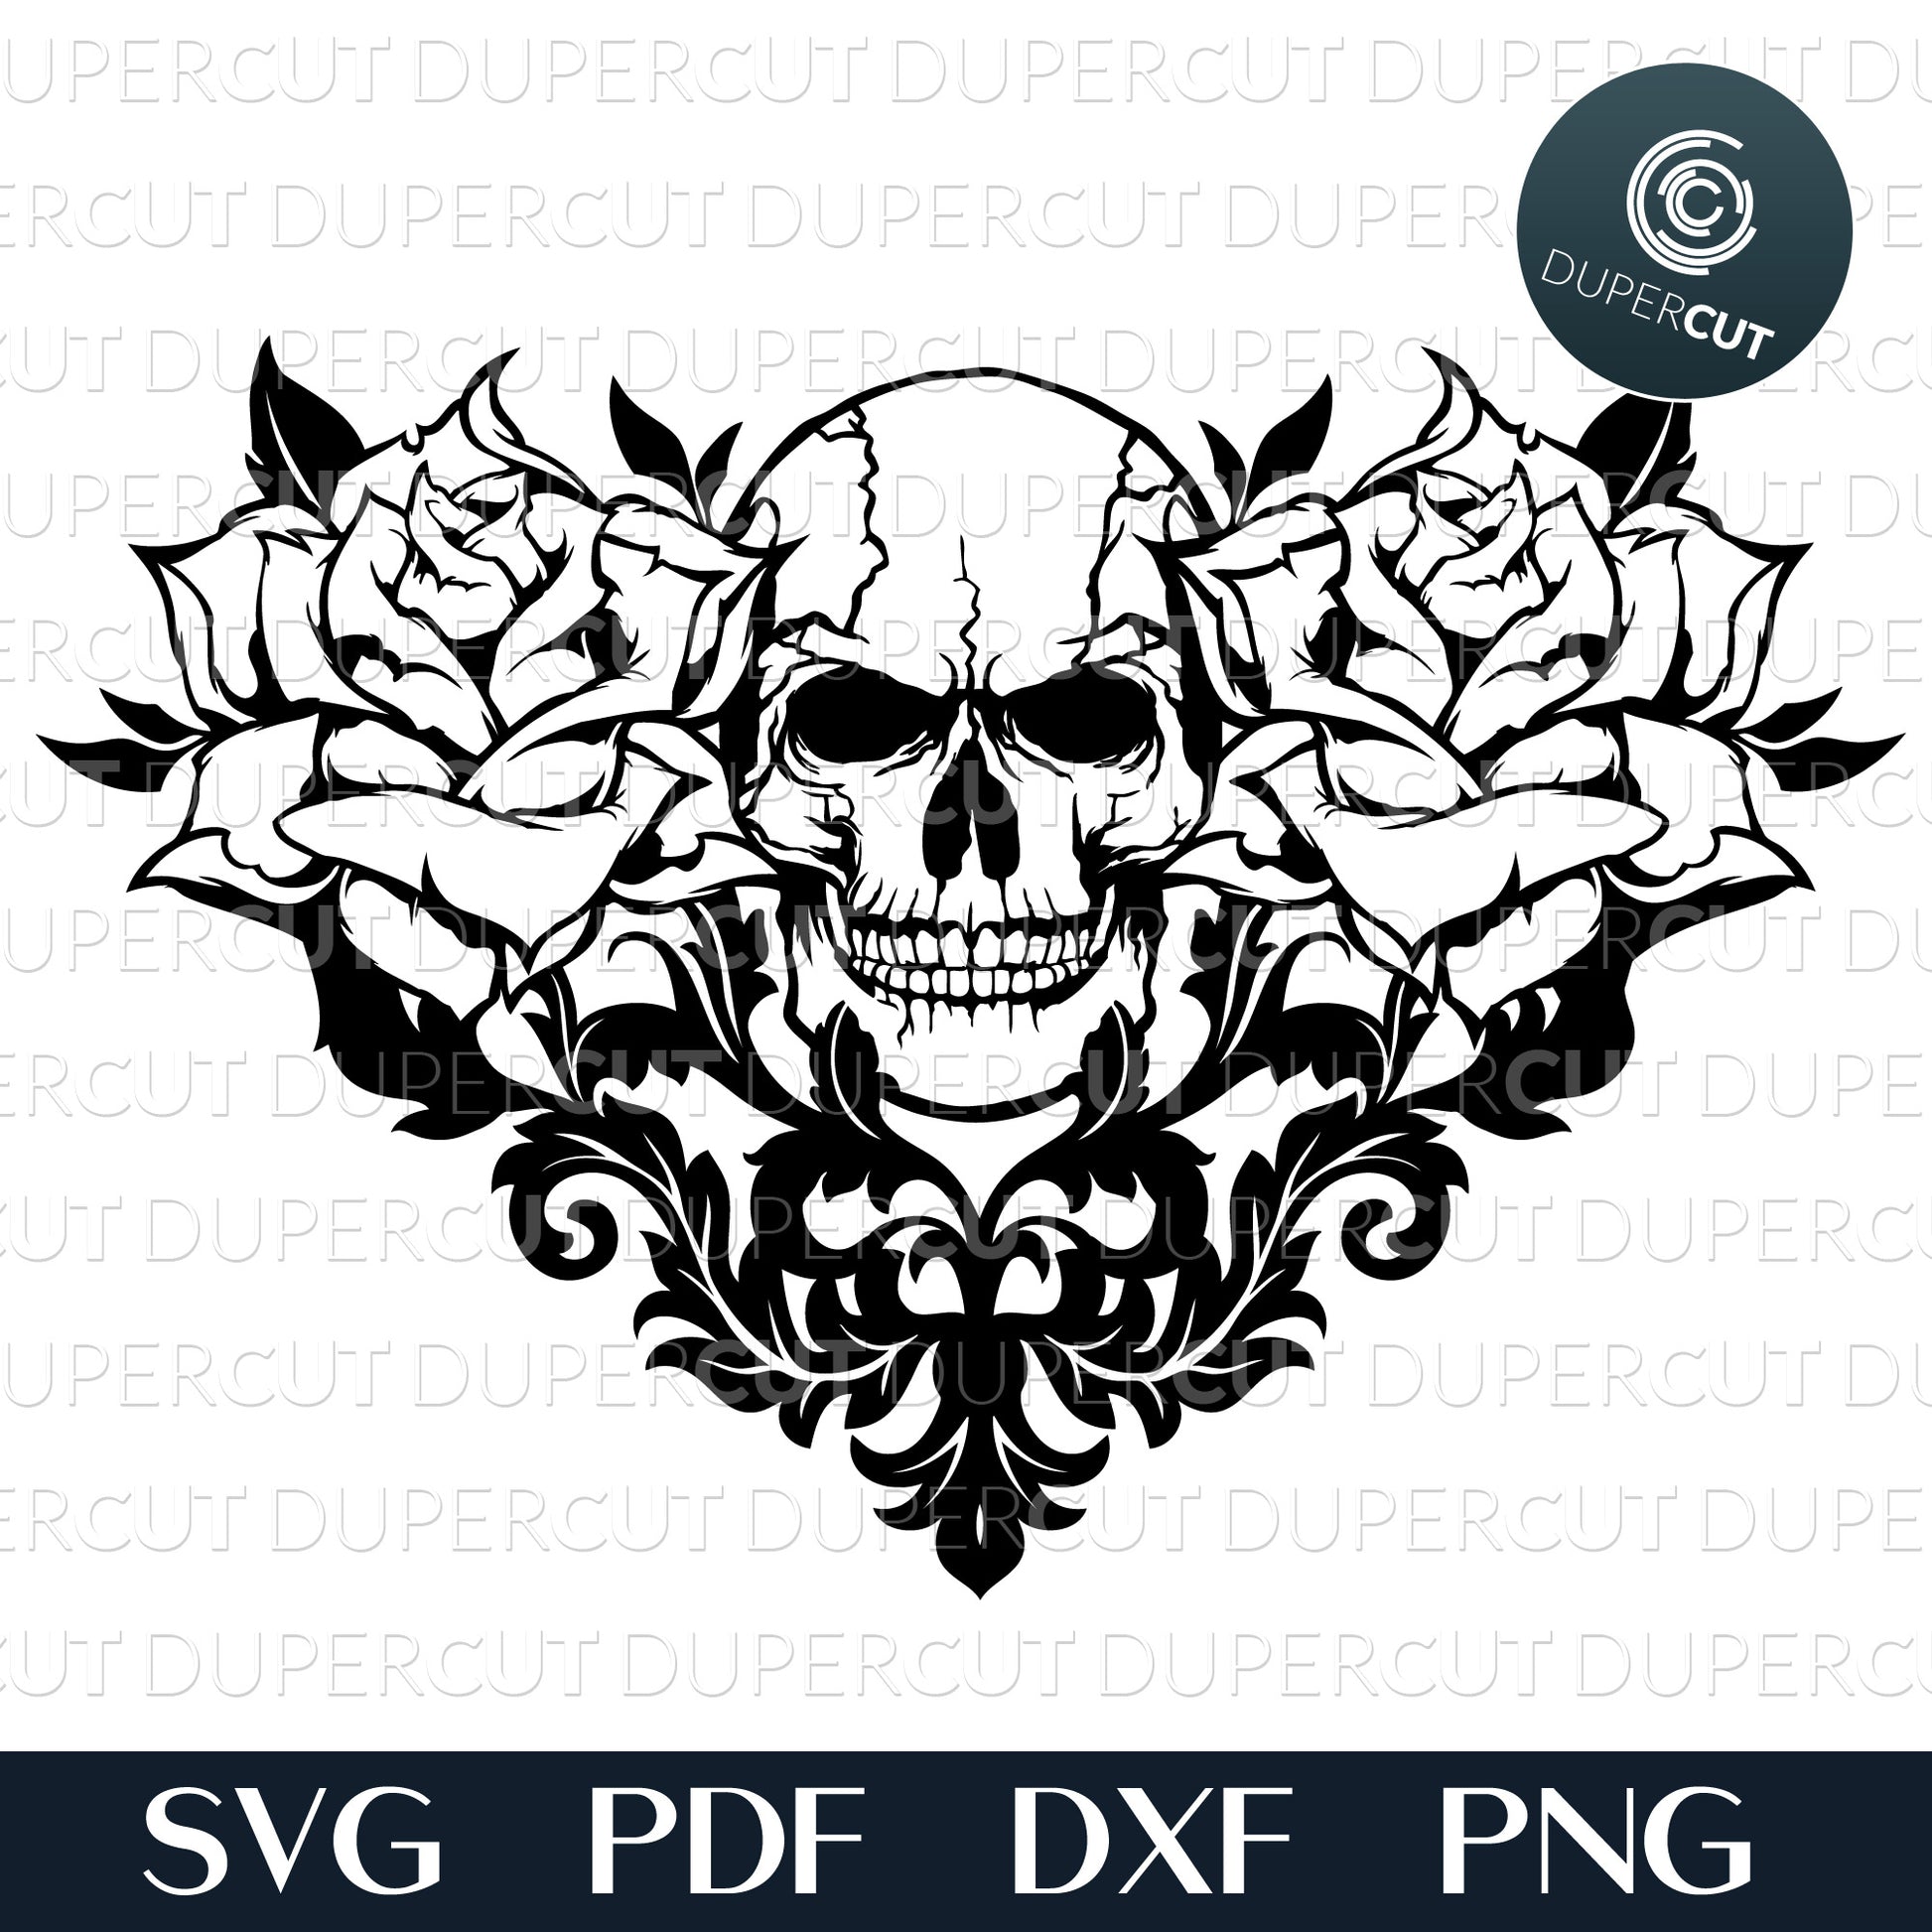 Paper cutting template - Steampunk Heart-shaped skull with roses and ornaments. Black and white line art design.  - SVG PNG DXF files for cutting machines: Cricut, Silhouette Cameo, Glowforge, CNC